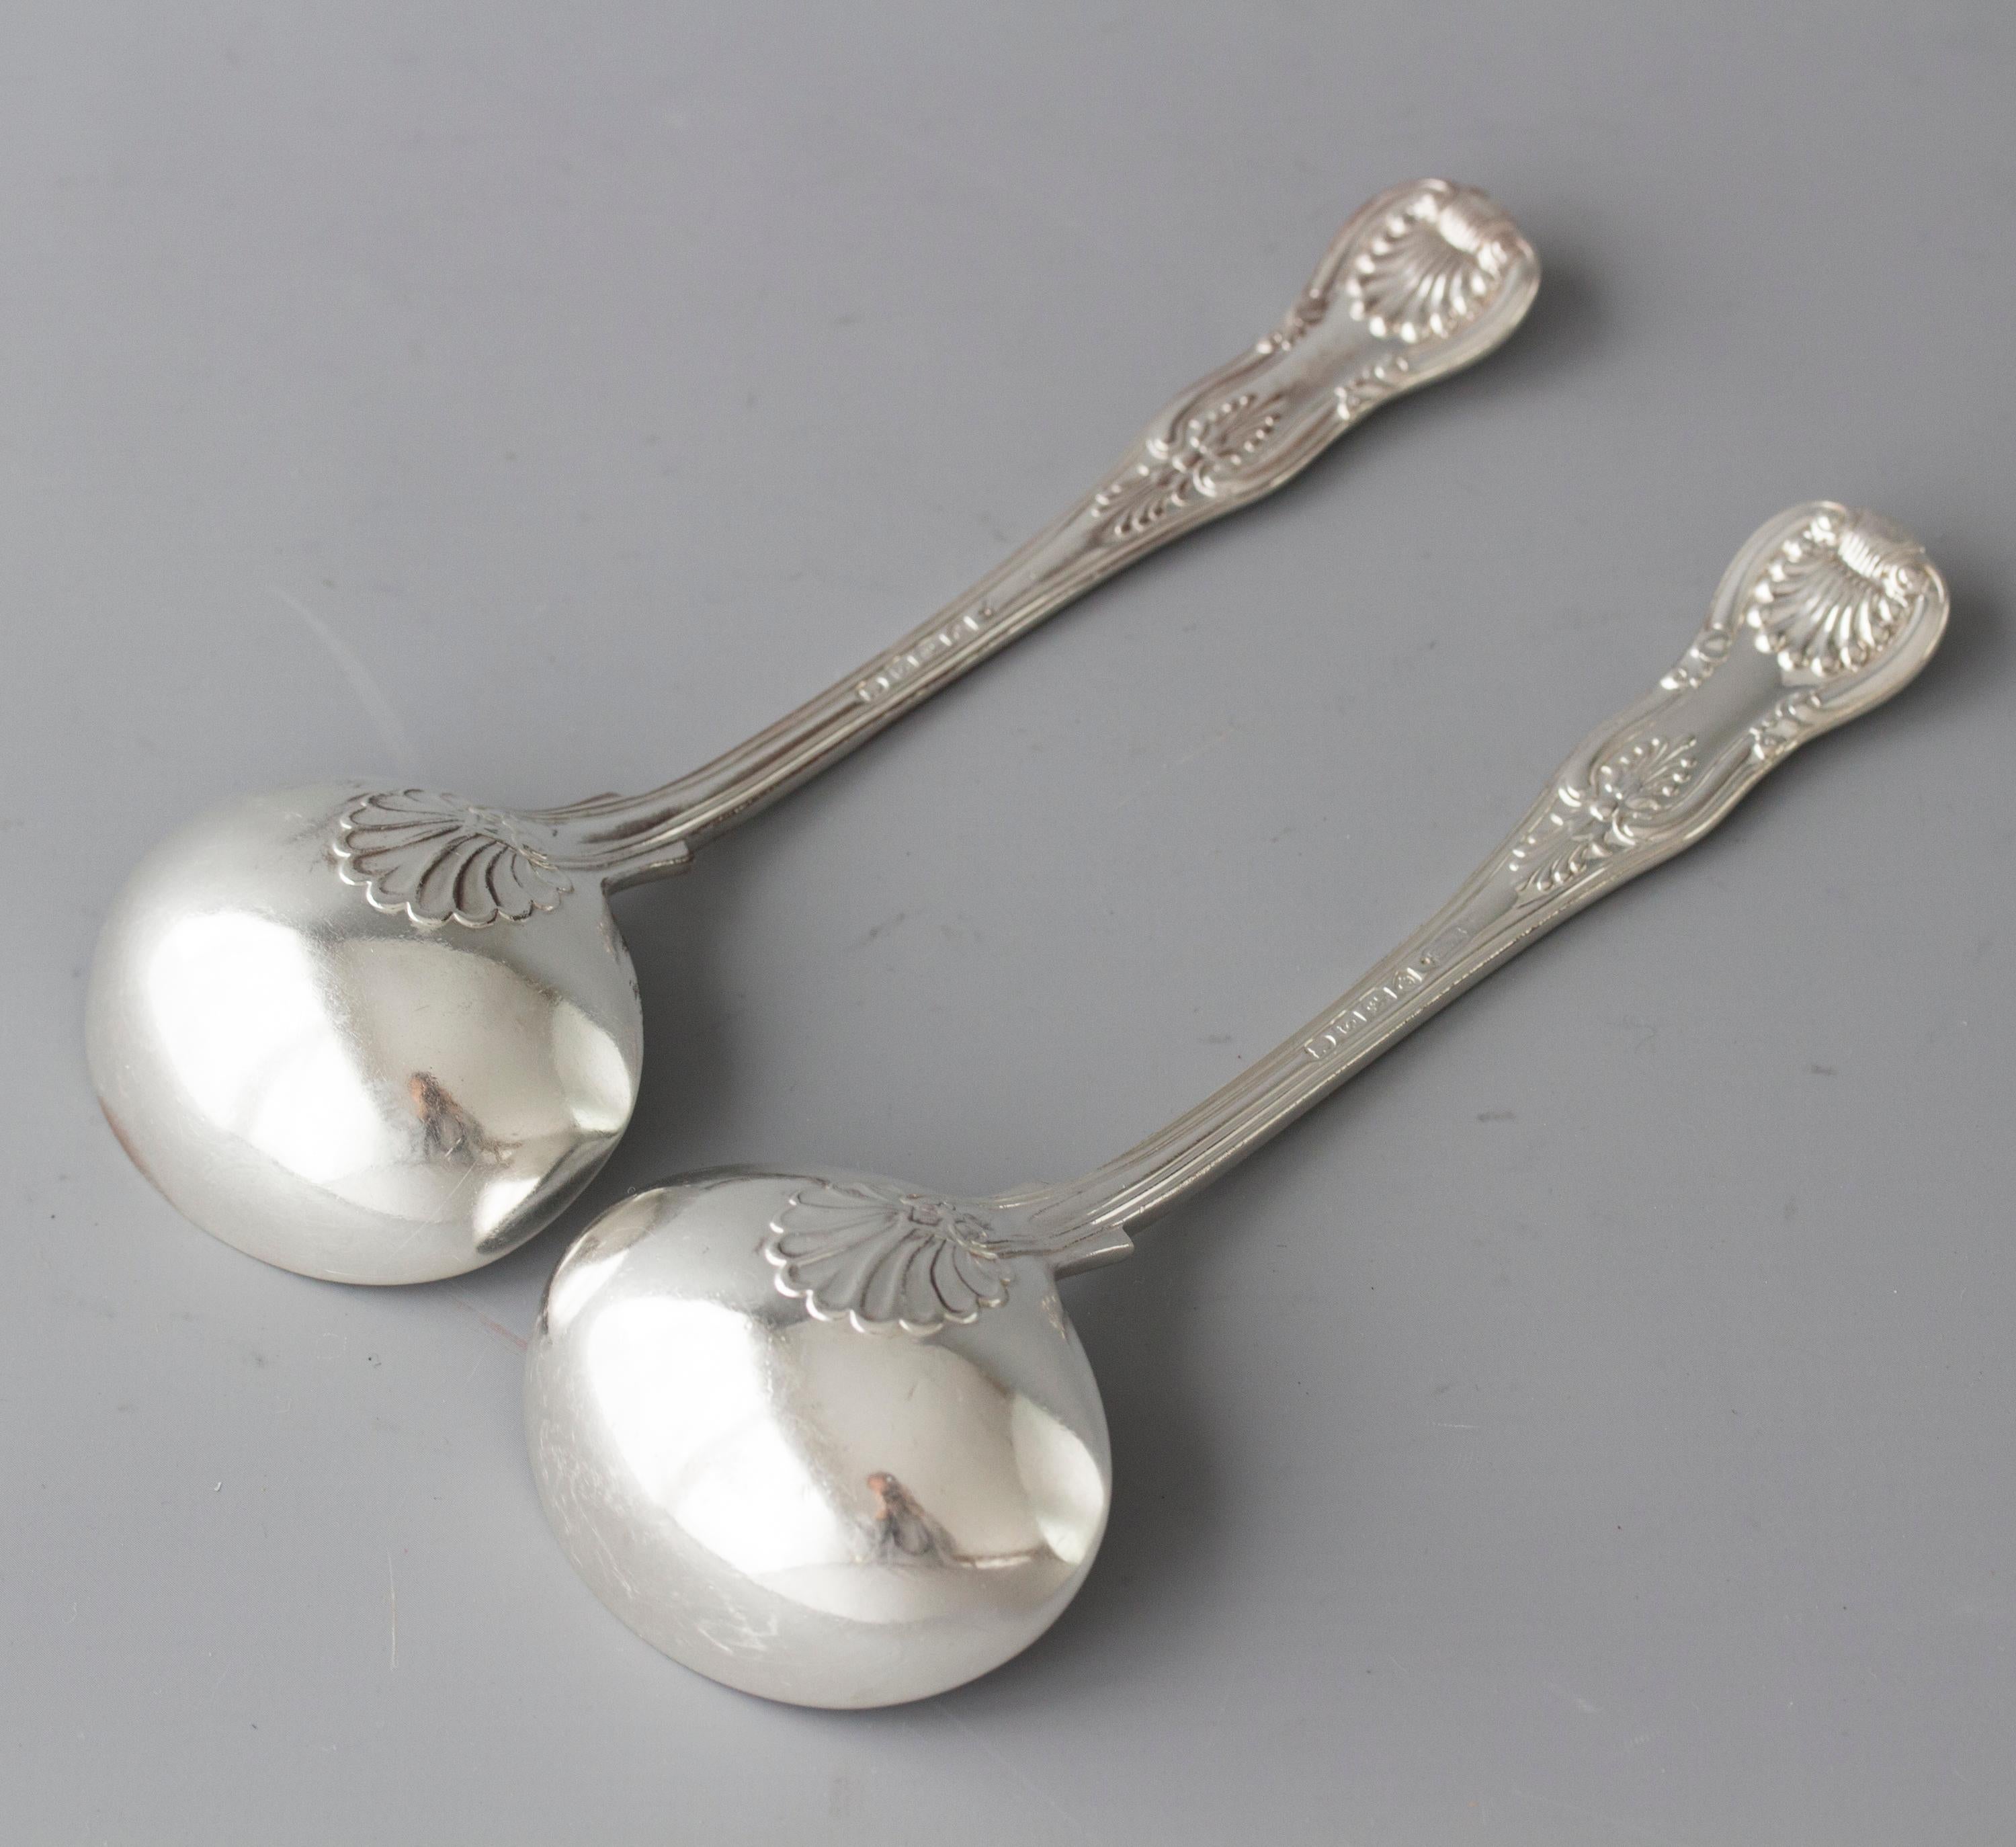 This wonderful pair of Kings pattern silver sauce ladles are in the classic double-struck standard form with the diamond heel, with a plain bowl.

Hallmarked for London 1834, makers mark WE for William Eaton.

Measures: Length 17 cm or